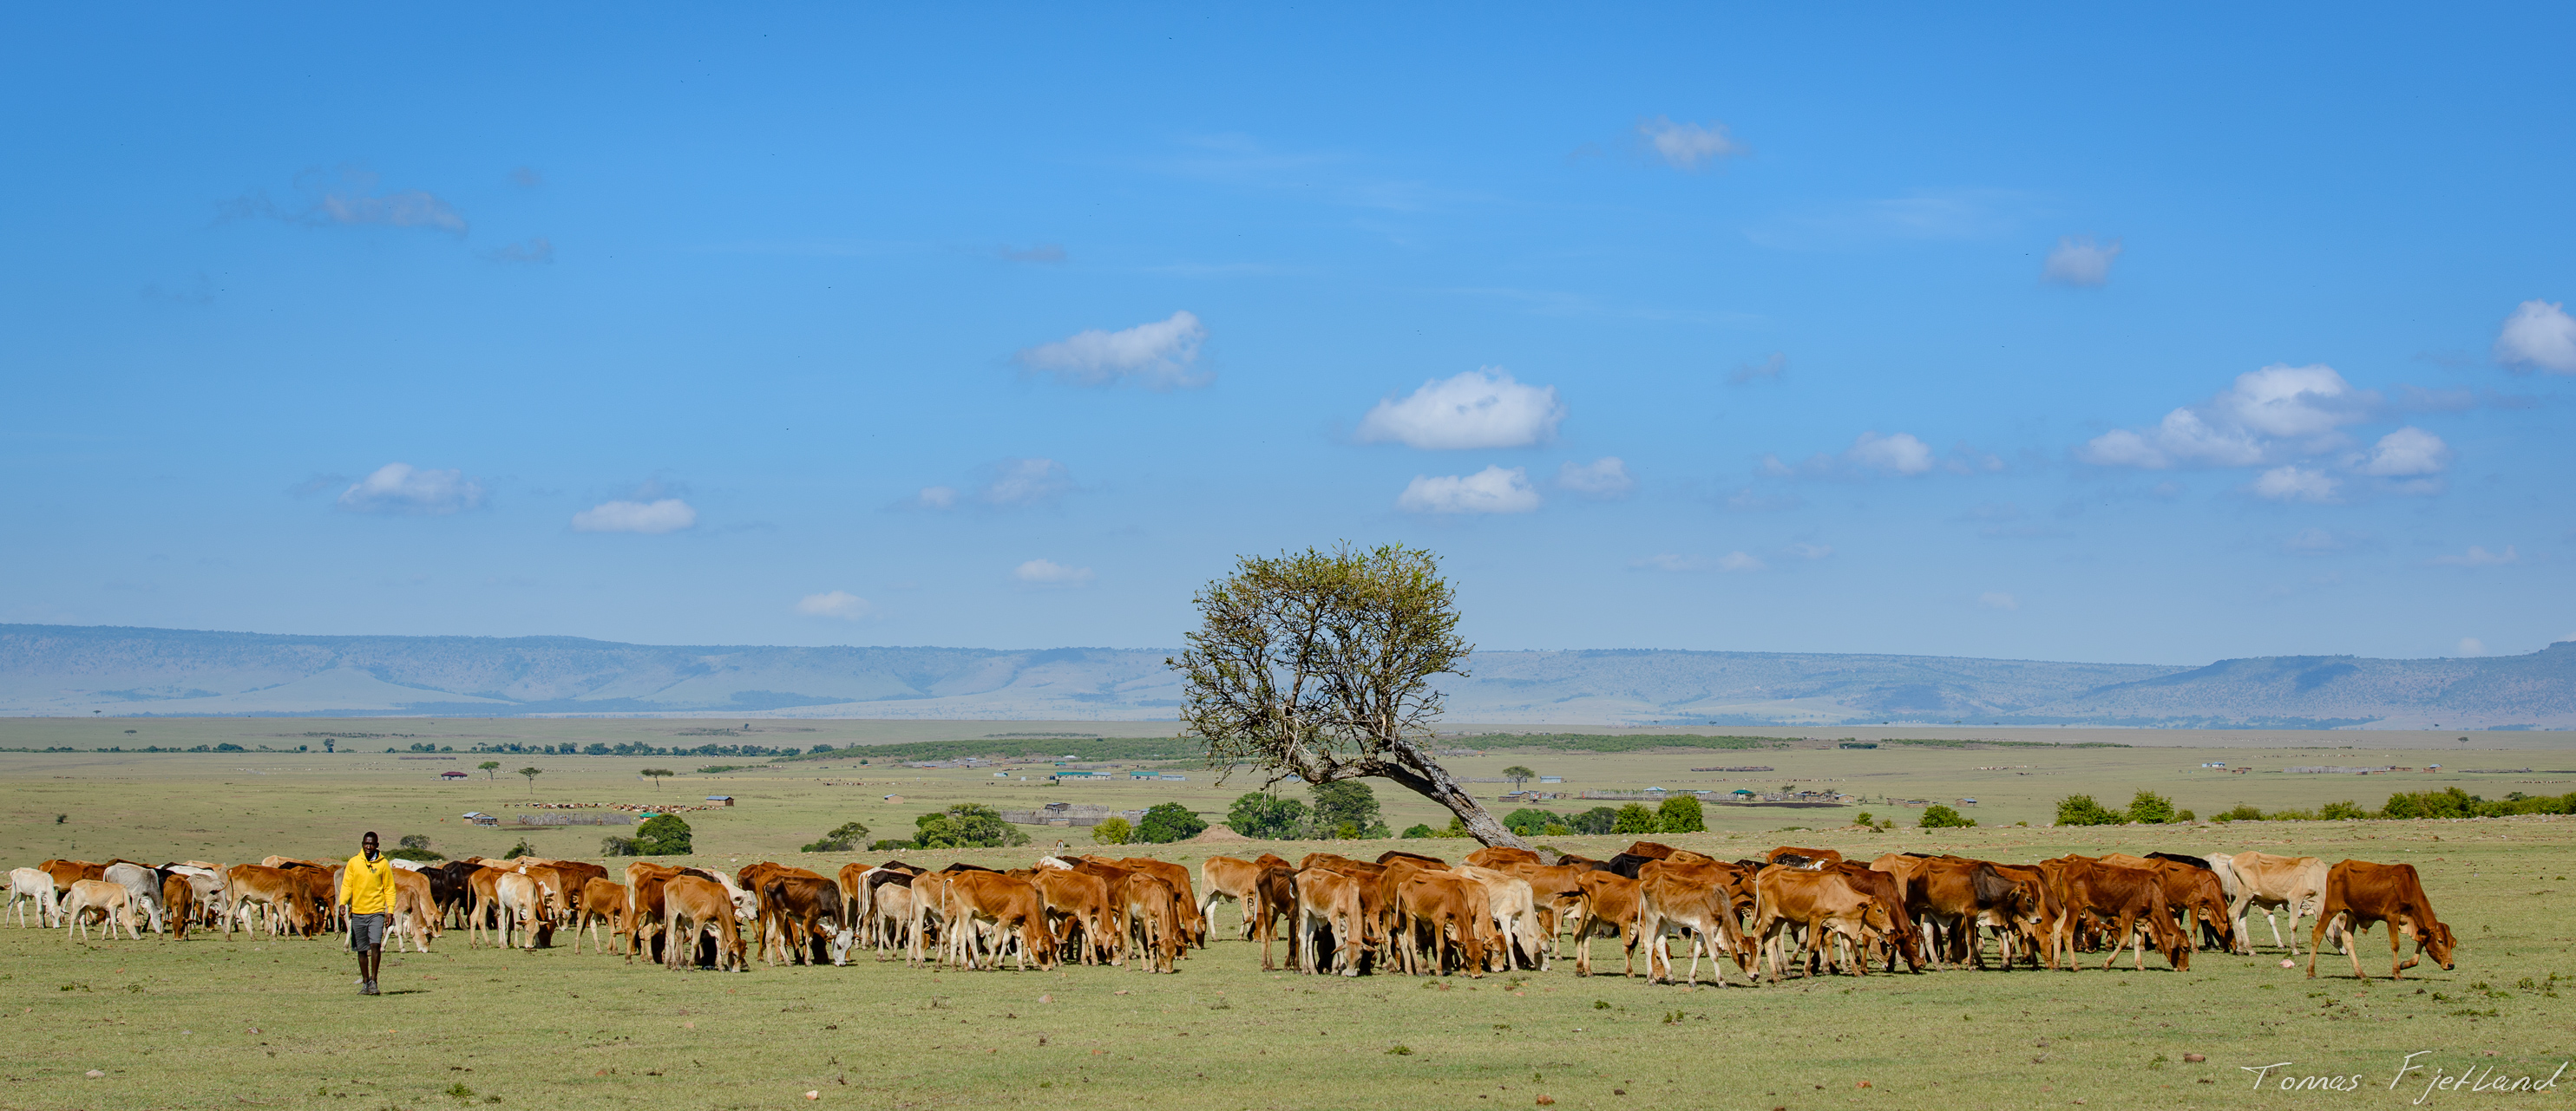 A maasai herder with cattle. Some permanent settlements in the background against the Oloololo escarpment